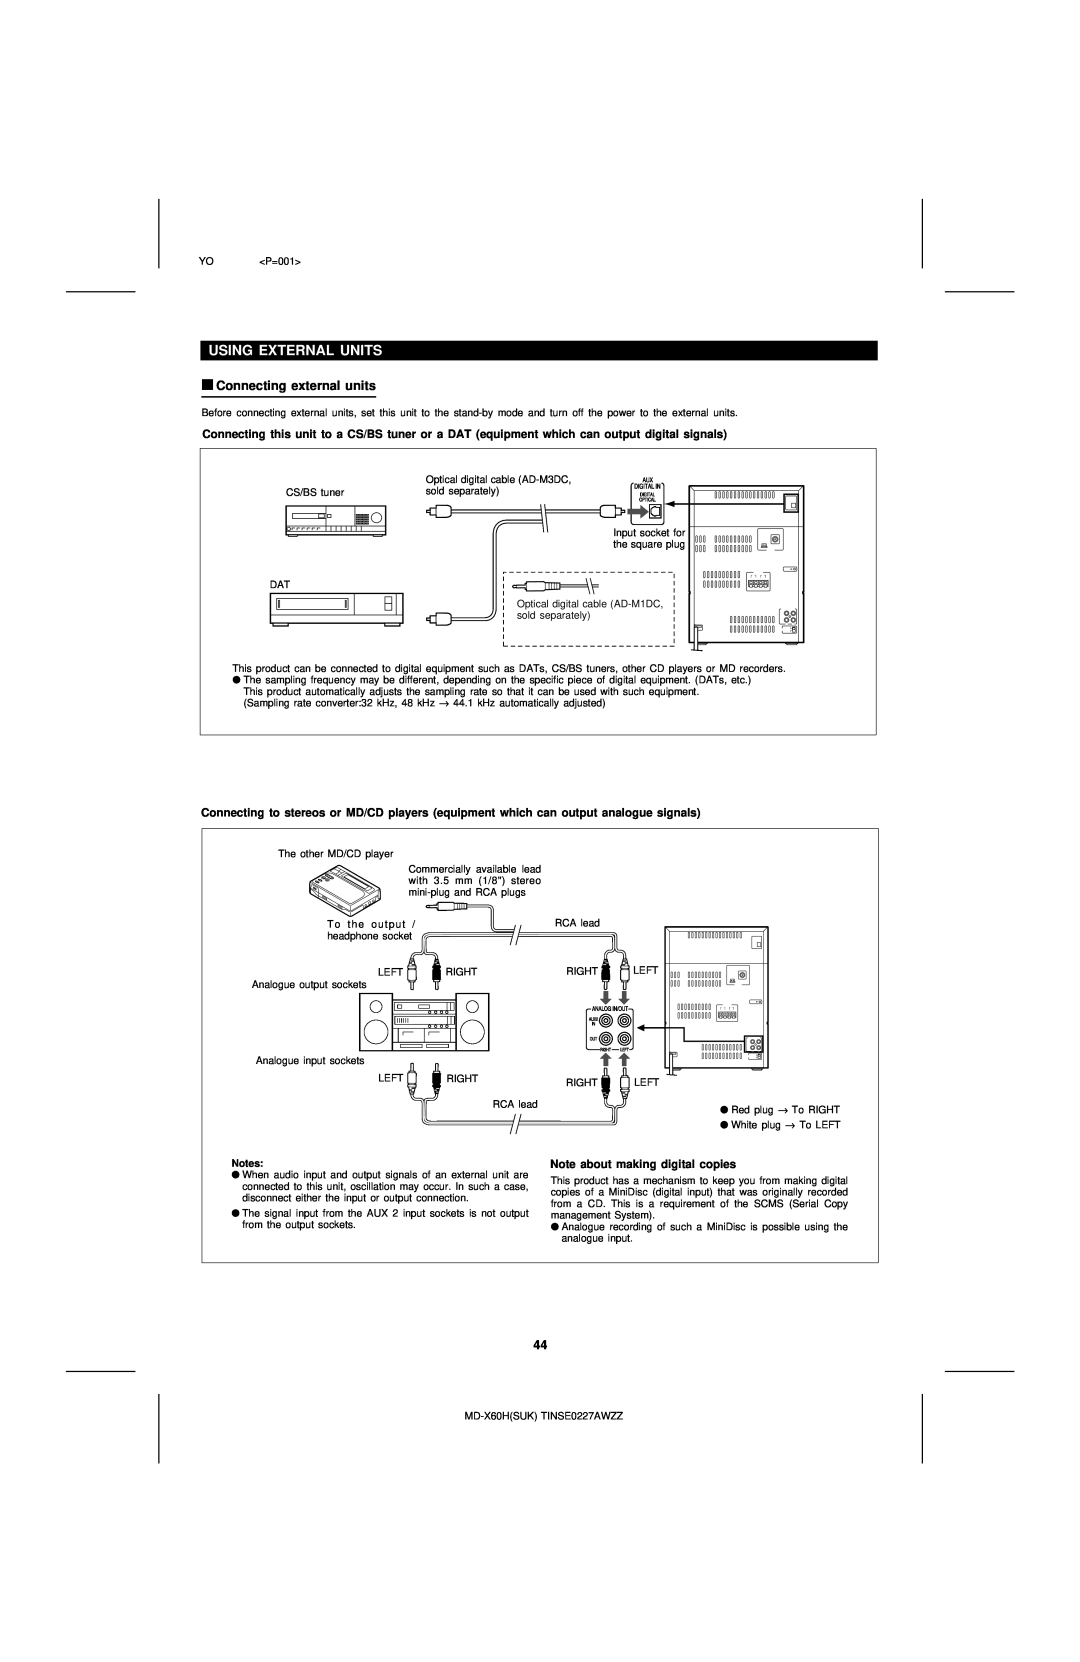 Sharp MD-X60H operation manual Using External Units, Connecting external units, Note about making digital copies 